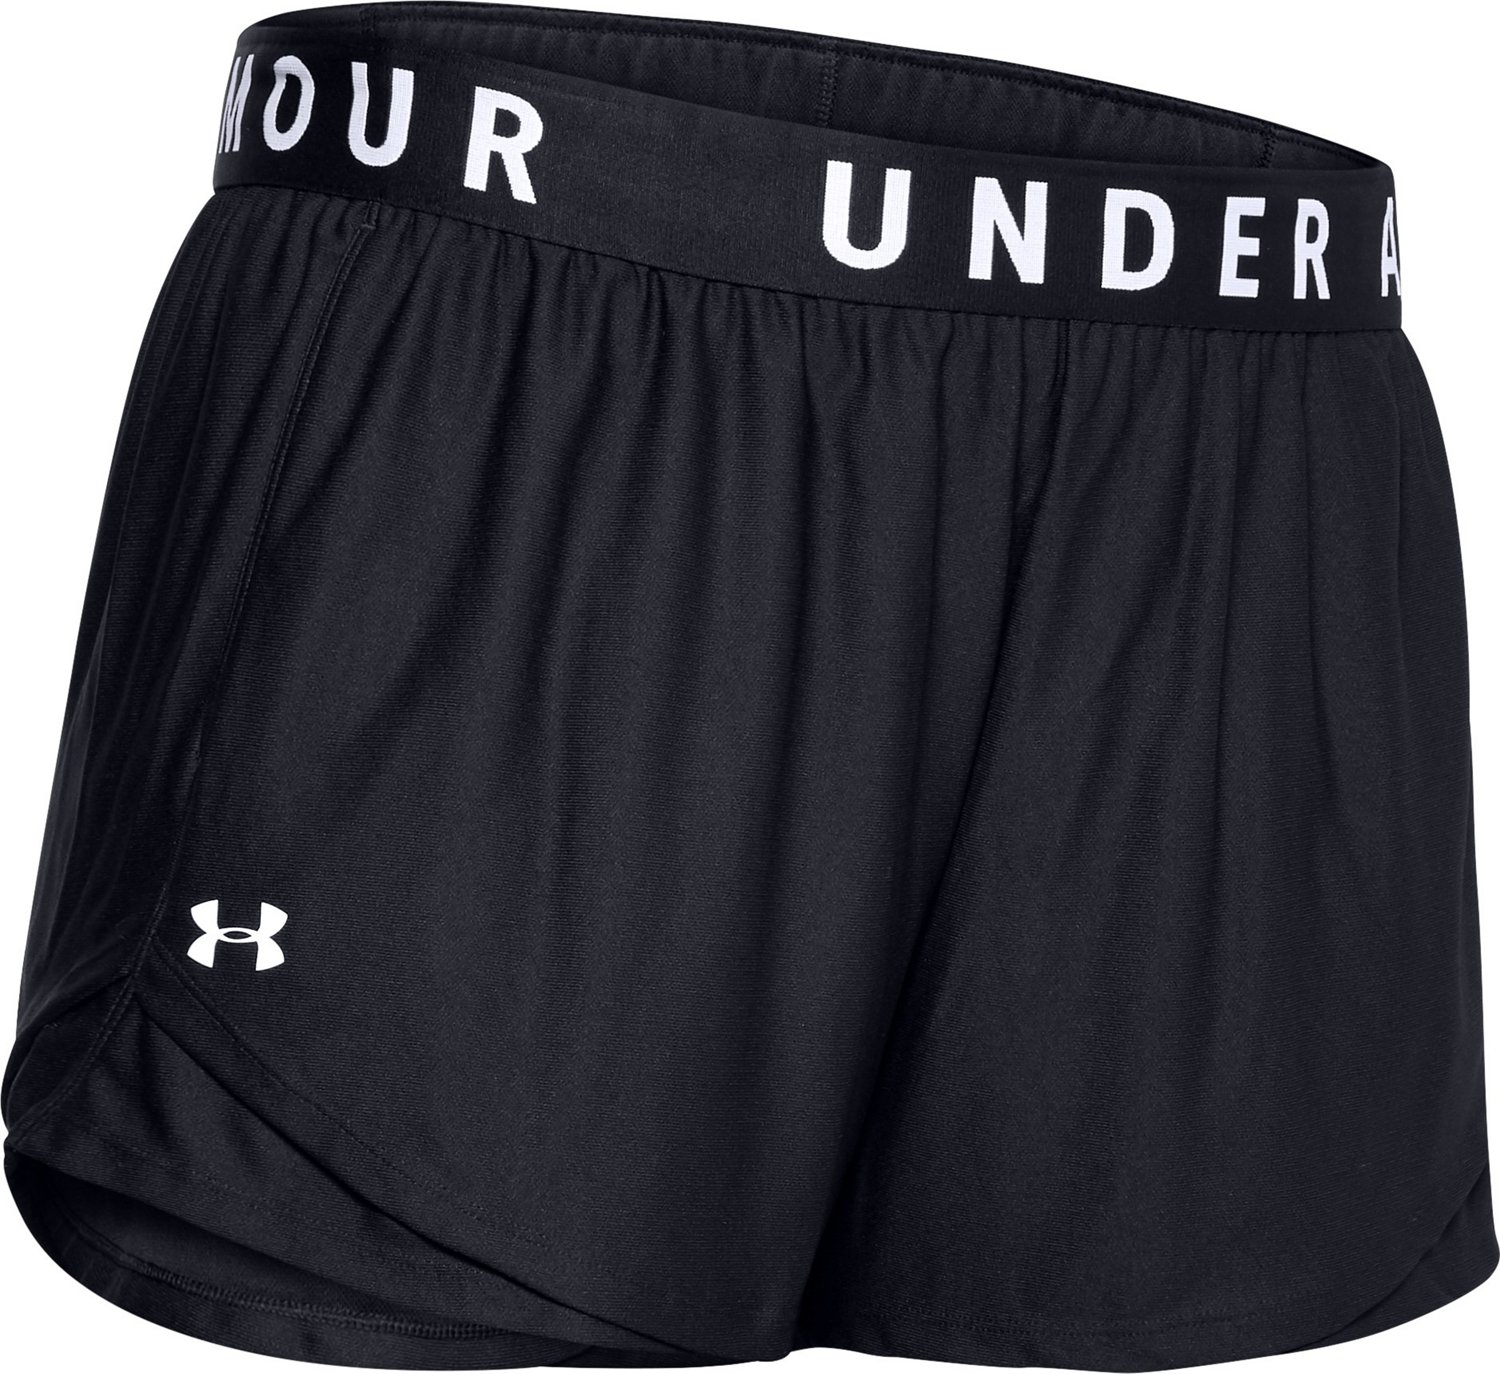 Under Armour Women's UA Play Up 2.0 Shorts 1292231 - size XS or XL